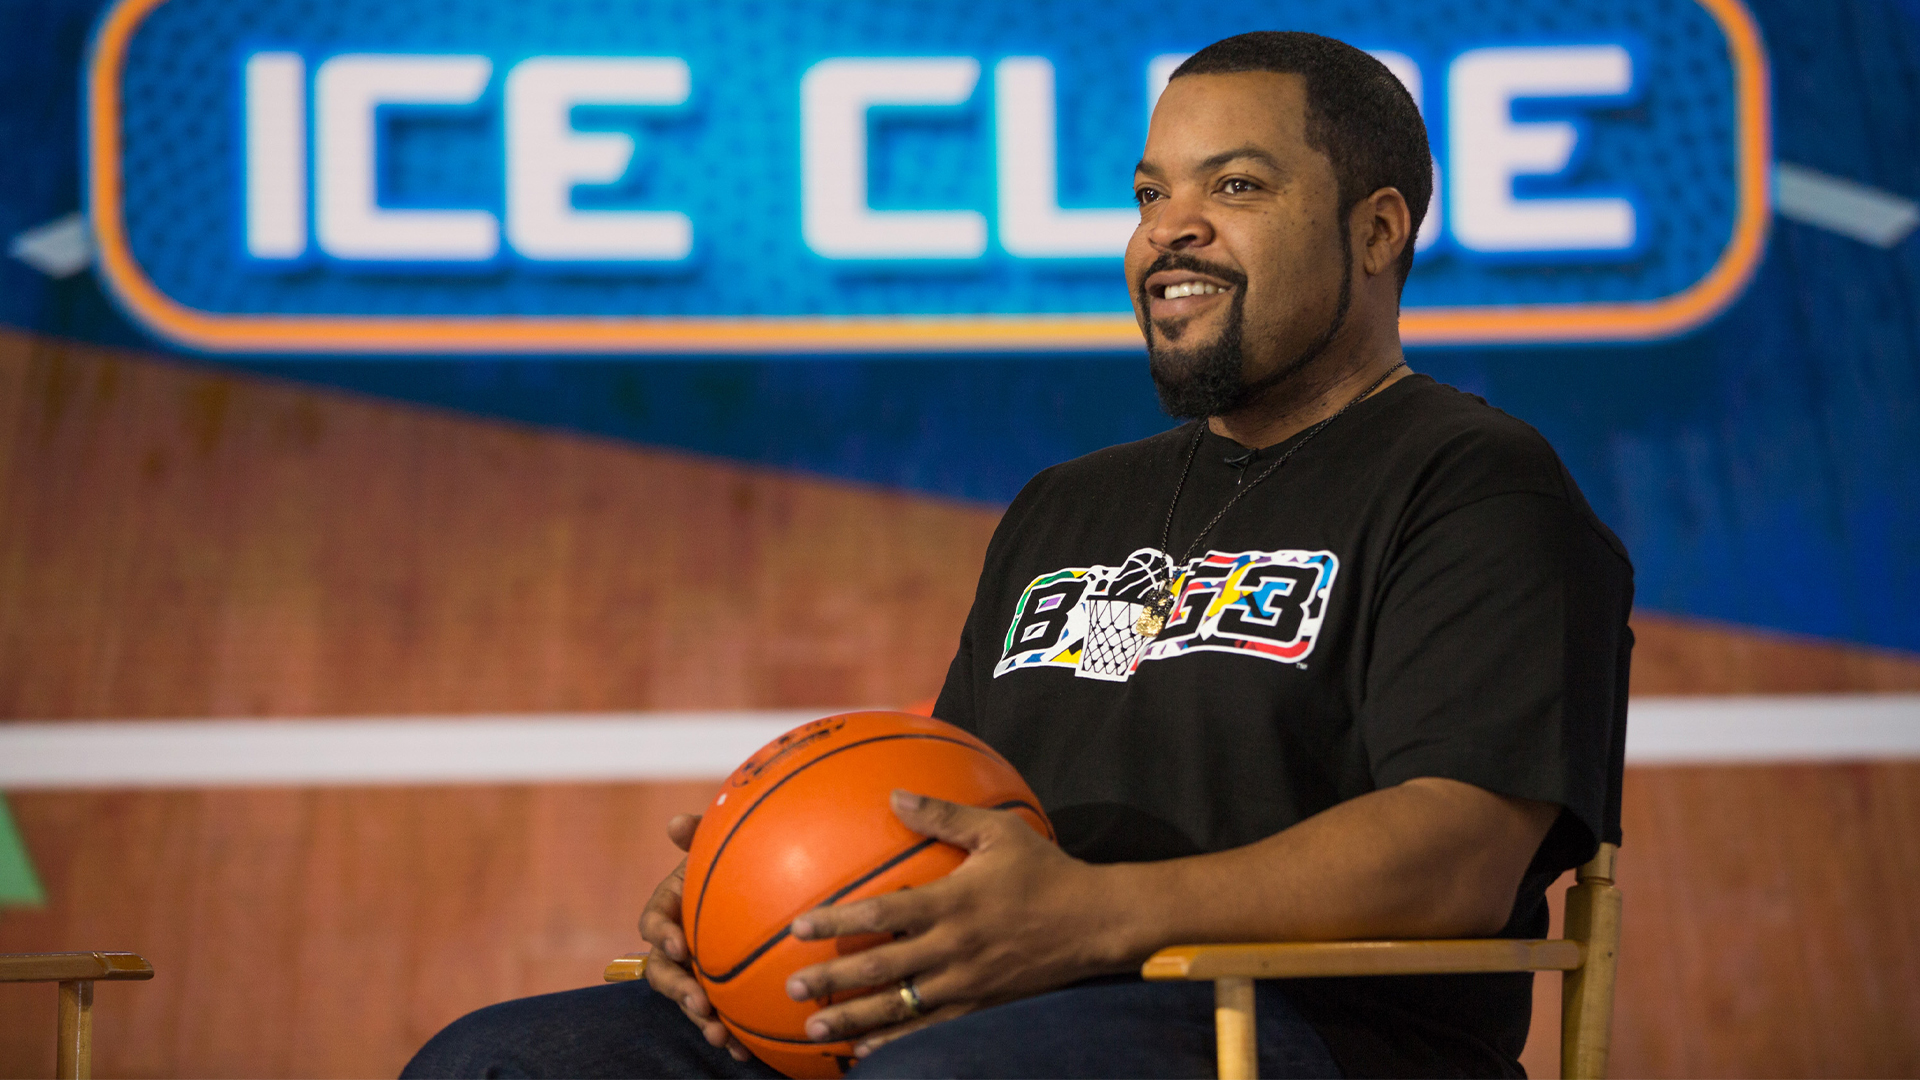 Ice Cube Reportedly Looking To Sell Several Big3 Teams To Outside Investors